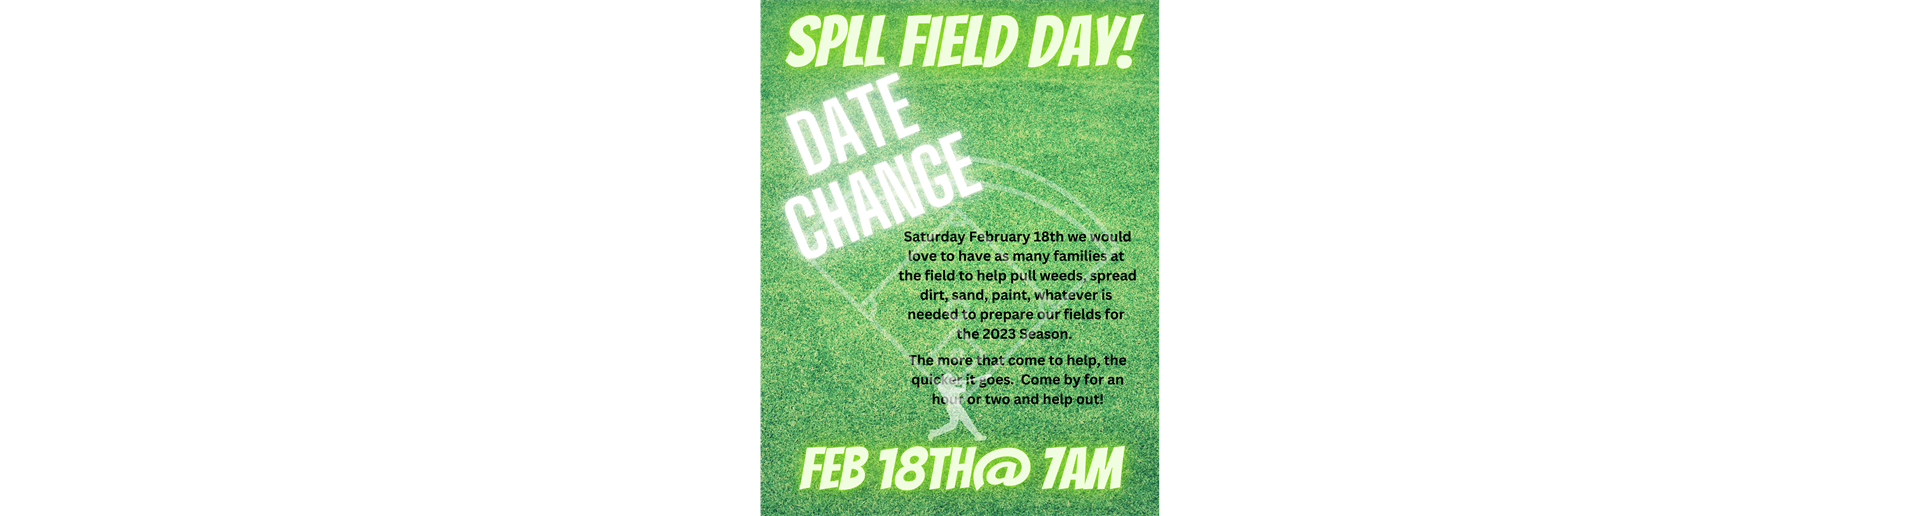 FIELD DAY DATE CHANGED to 2/18